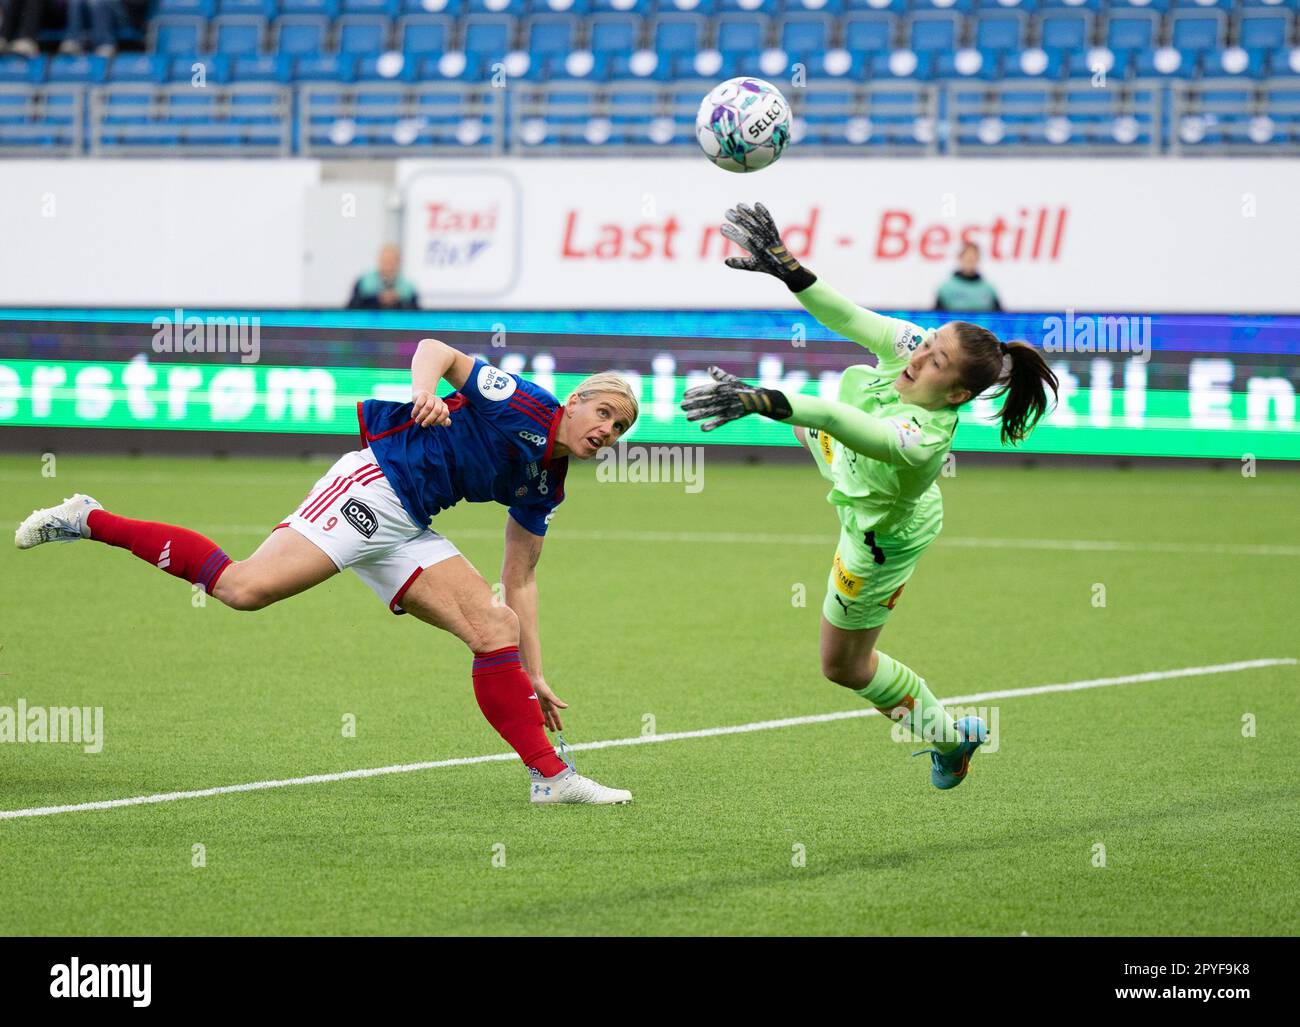 Oslo, Norway. 03rd May, 2023. Oslo, Norway, May 3rd 2023: Goalkeeper Cecilie Fiskerstrand (13 LSK) make a save during the Toppserien league game between Valerenga and LSK at Intility Arena in Oslo, Norway (Ane Frosaker/SPP) Credit: SPP Sport Press Photo. /Alamy Live News Stock Photo